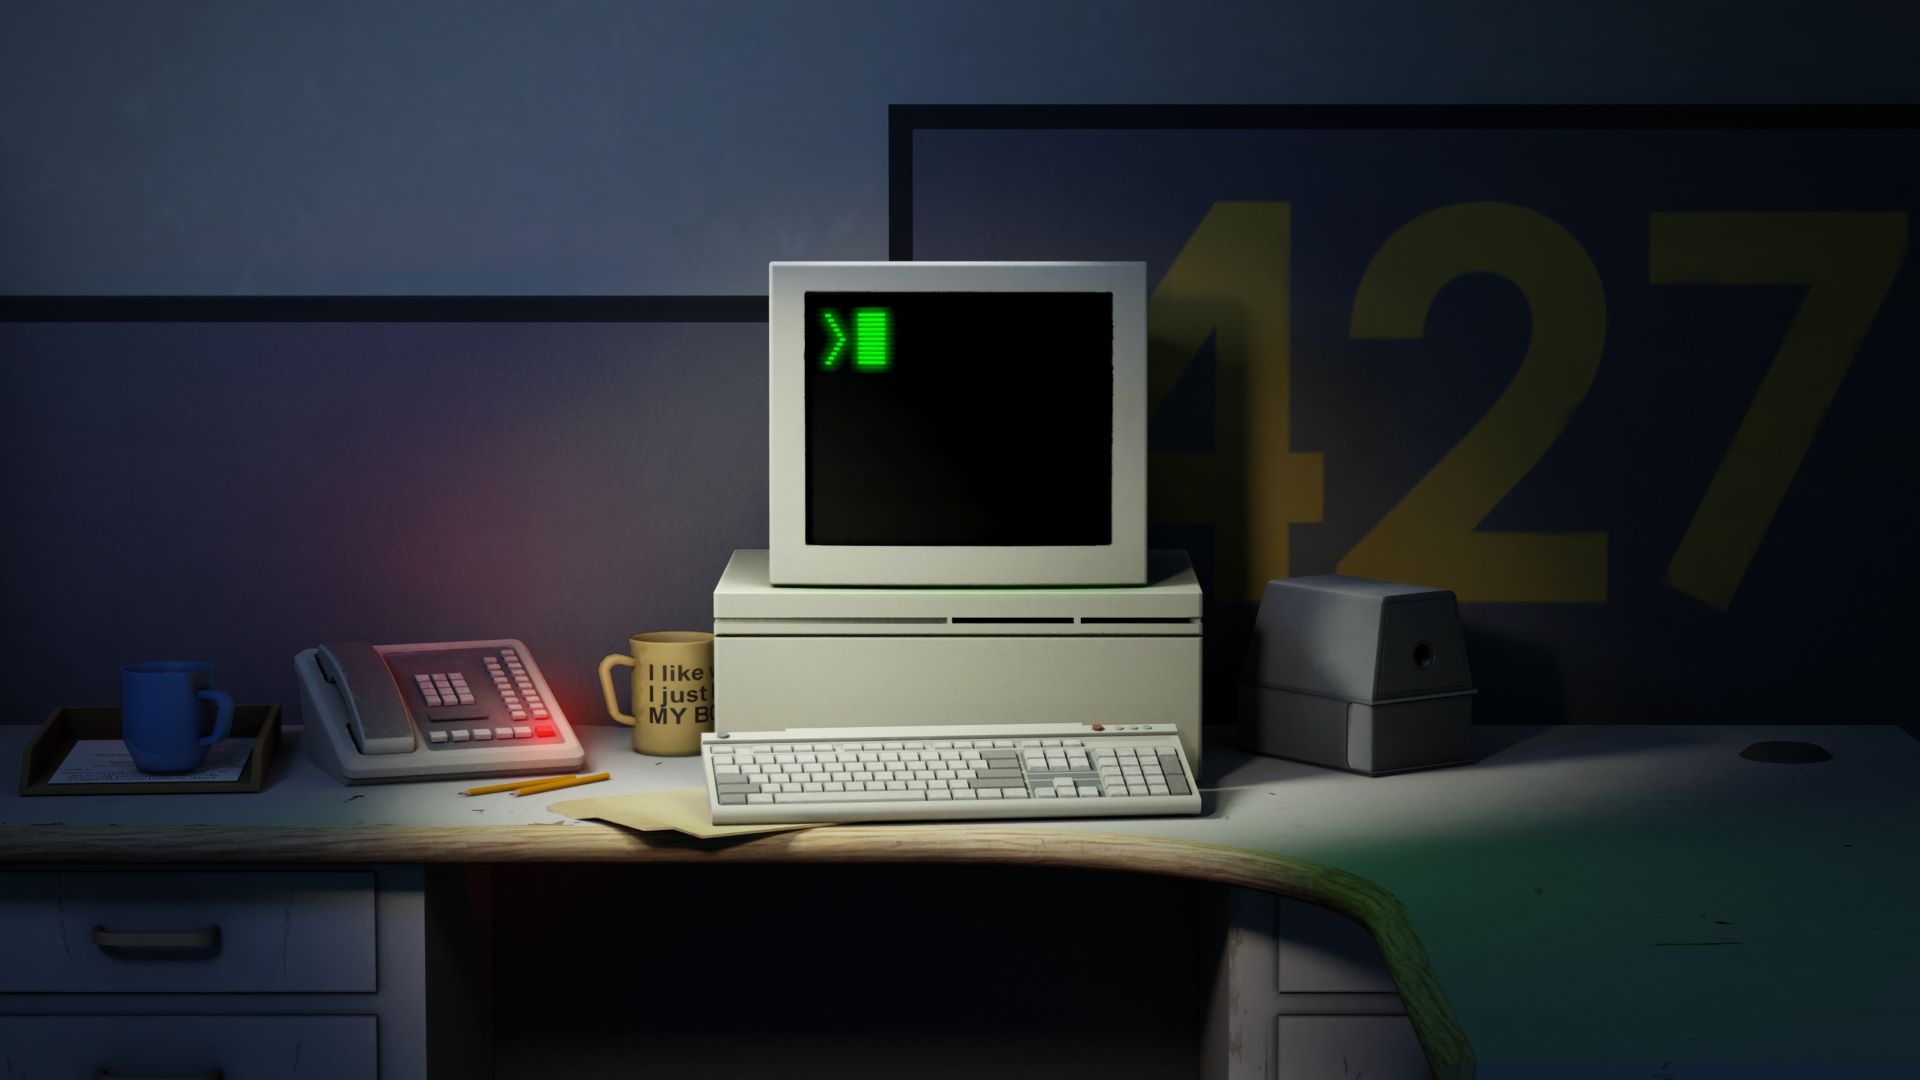 The Stanley Parable Ultra Deluxe: The release date, April 27, is a reference to protagonist's employee number (4/27). 1920x1080 Full HD Background.